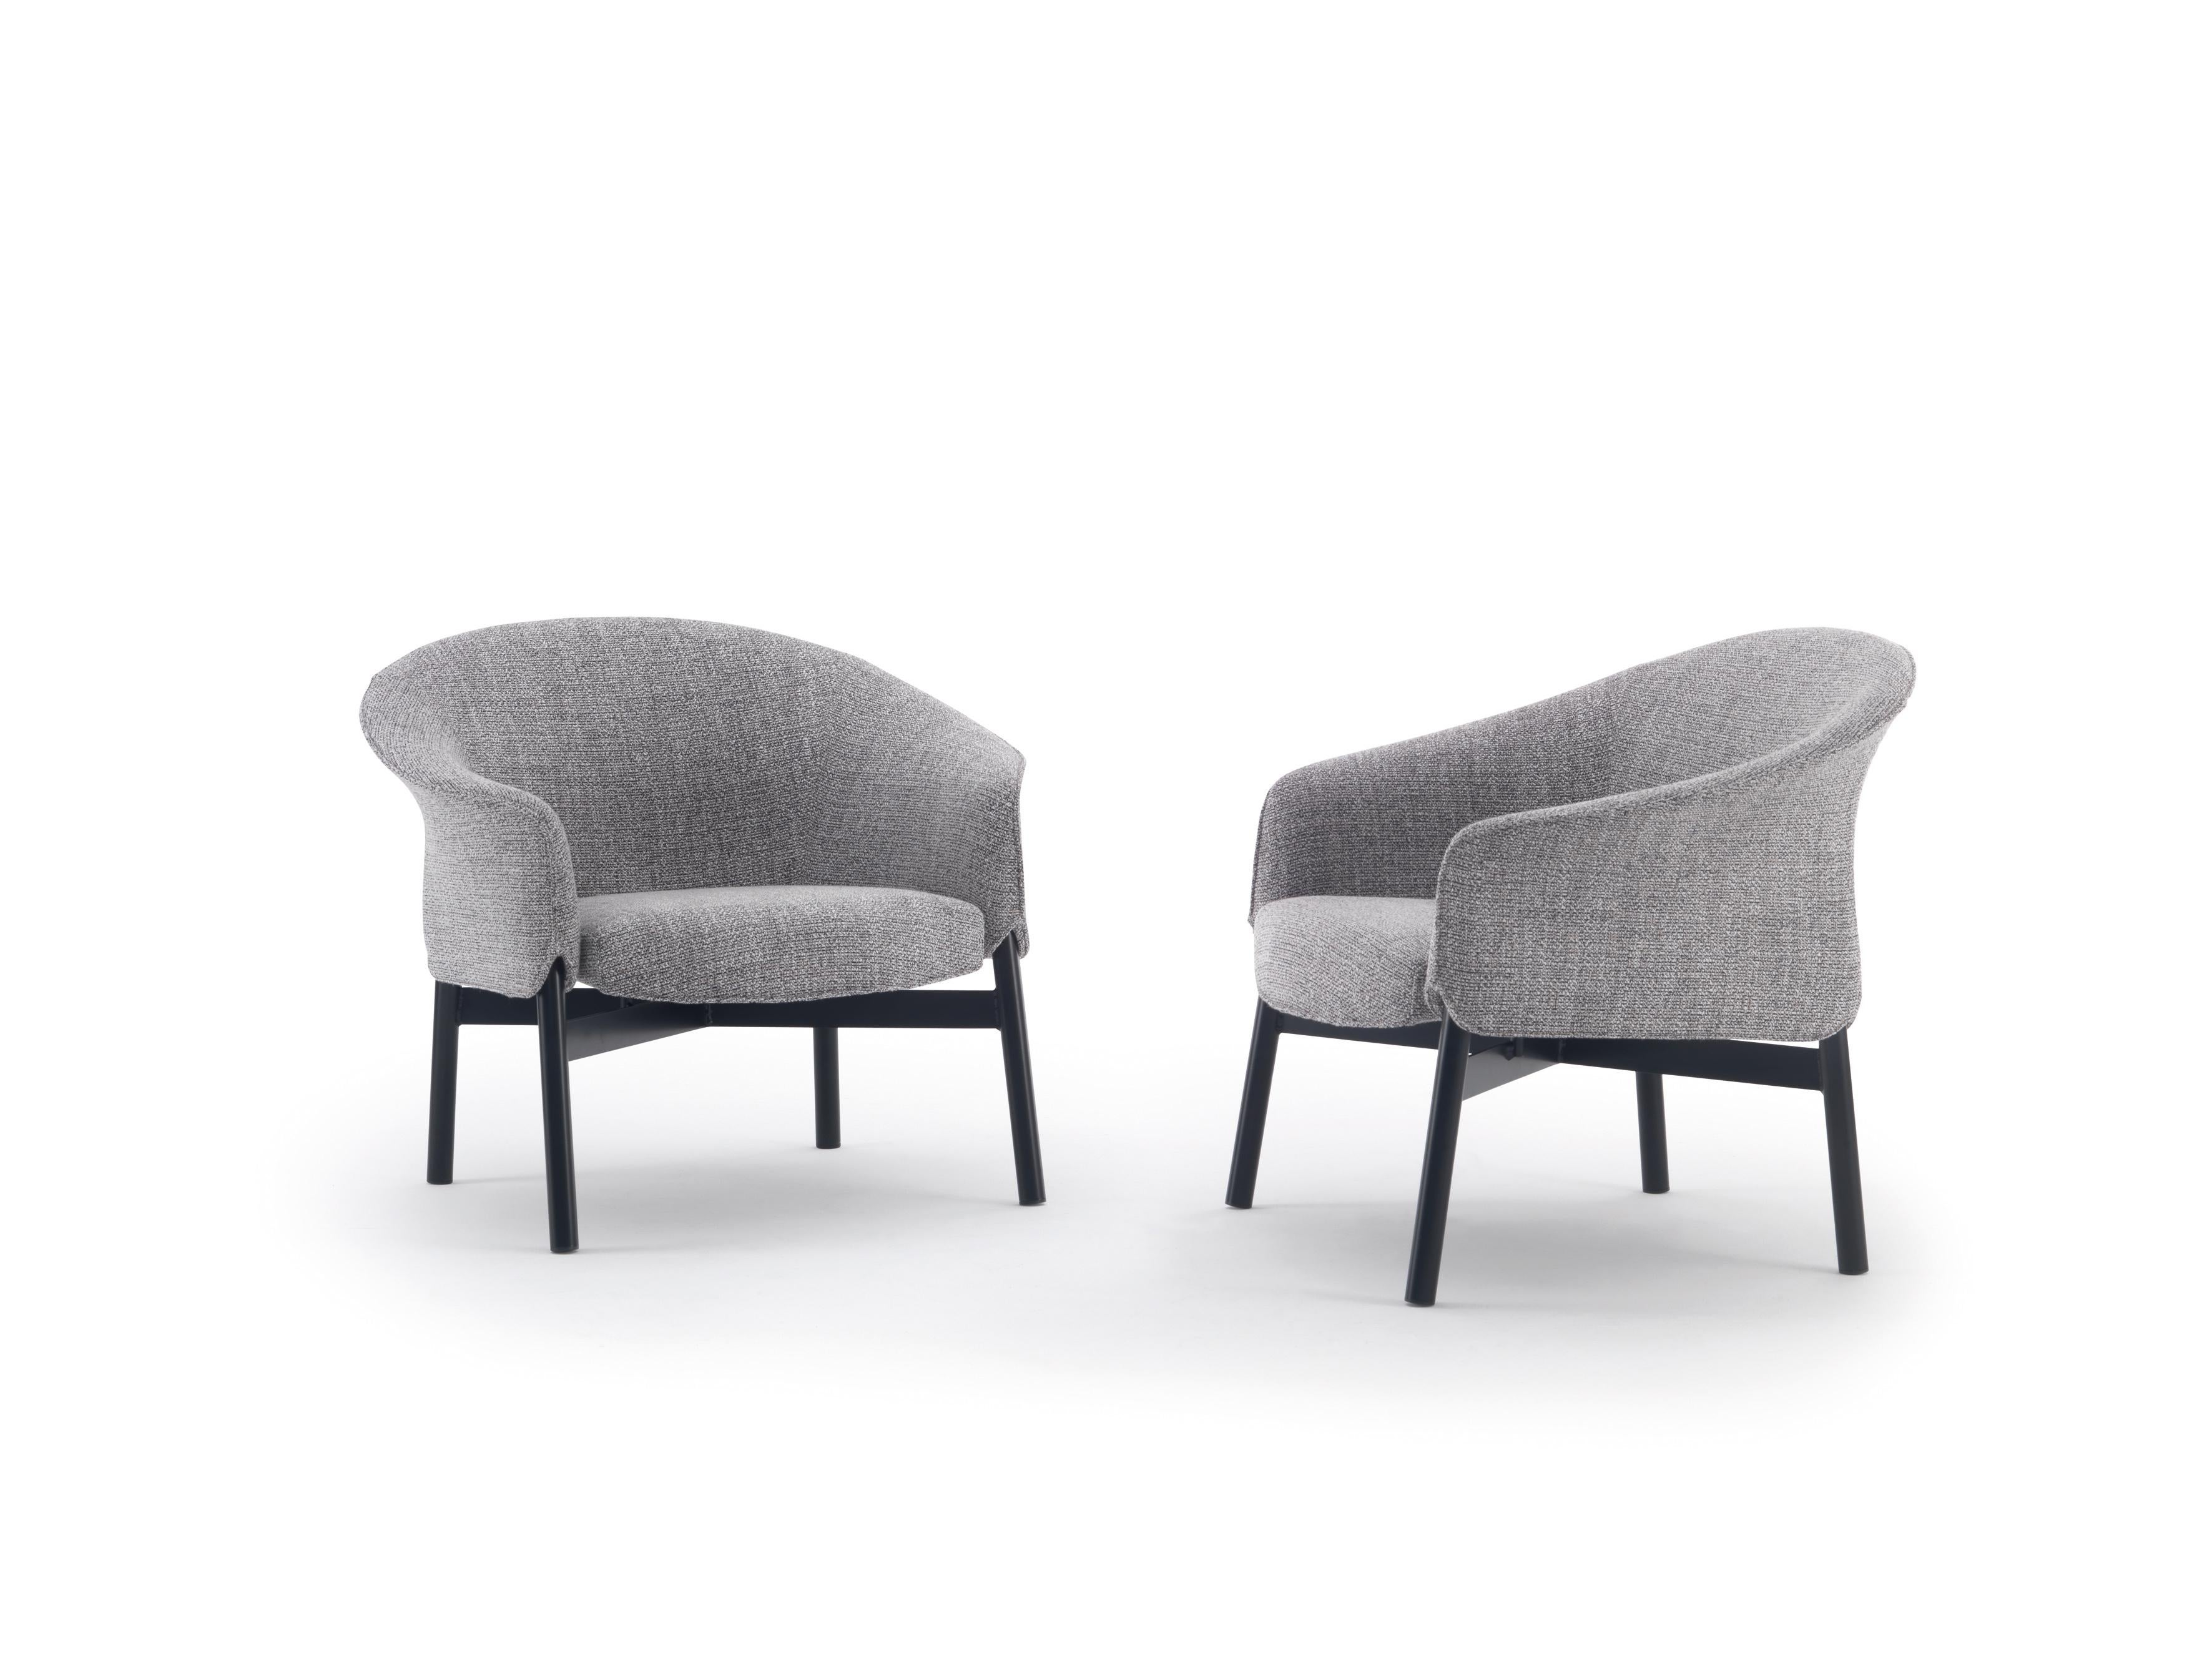 Arflex Gloria Low Version Chair in Cabas Fabric by Claesson Koivisto Rune. She can look smart for when she goes to work, dressed up when going to a party, or put on something cosy when staying in. Dress her as you want her to be!

Additional